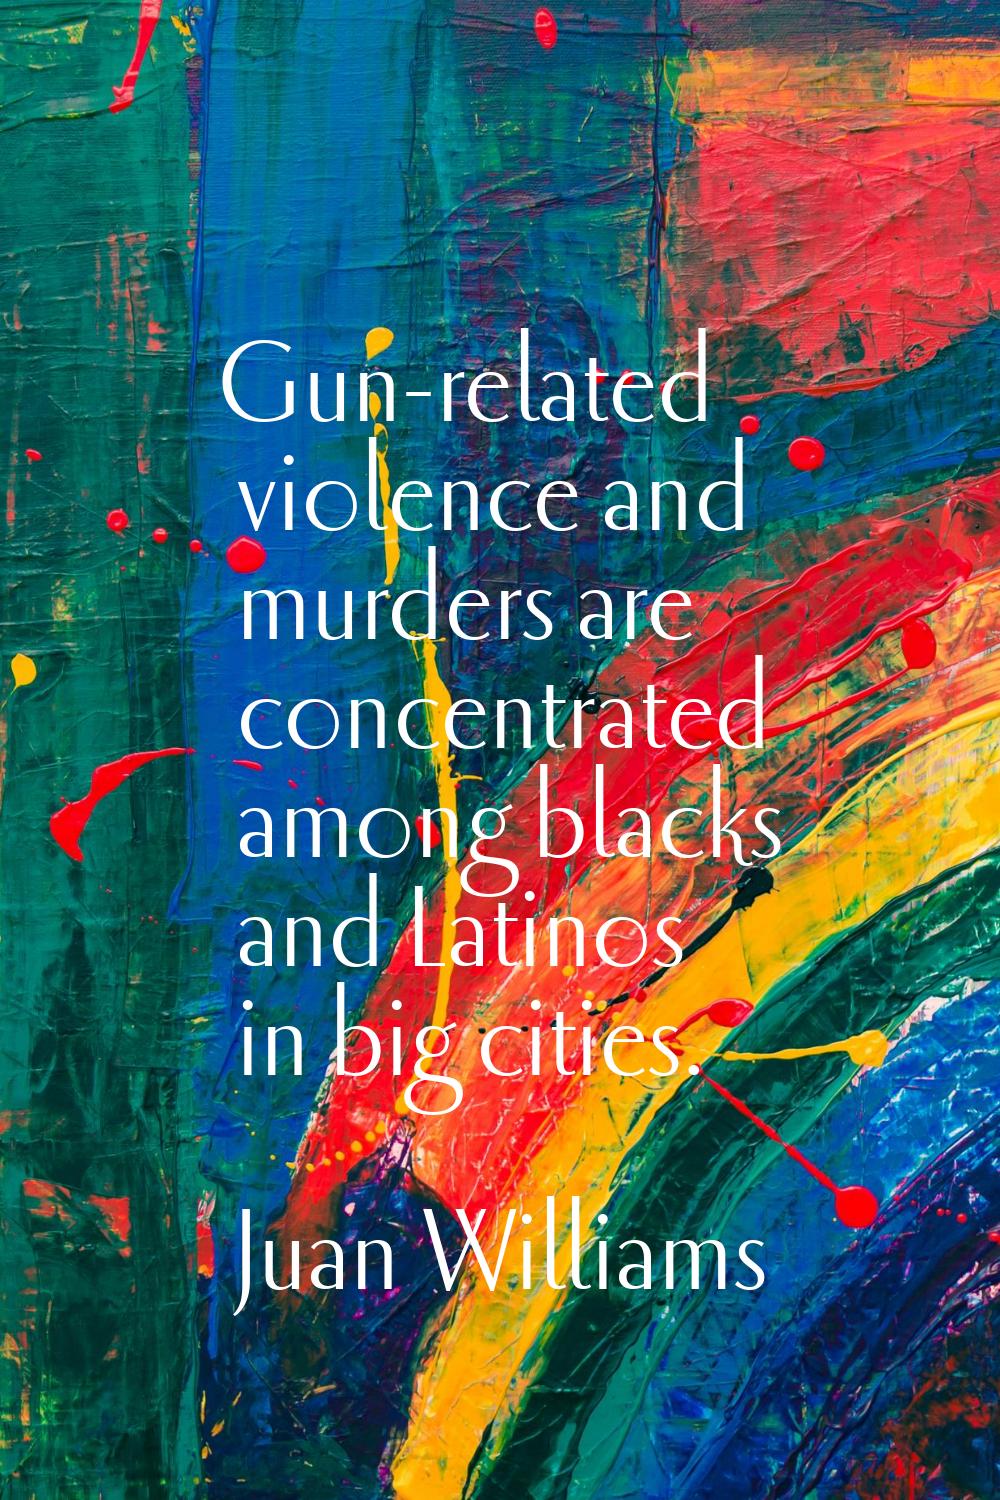 Gun-related violence and murders are concentrated among blacks and Latinos in big cities.